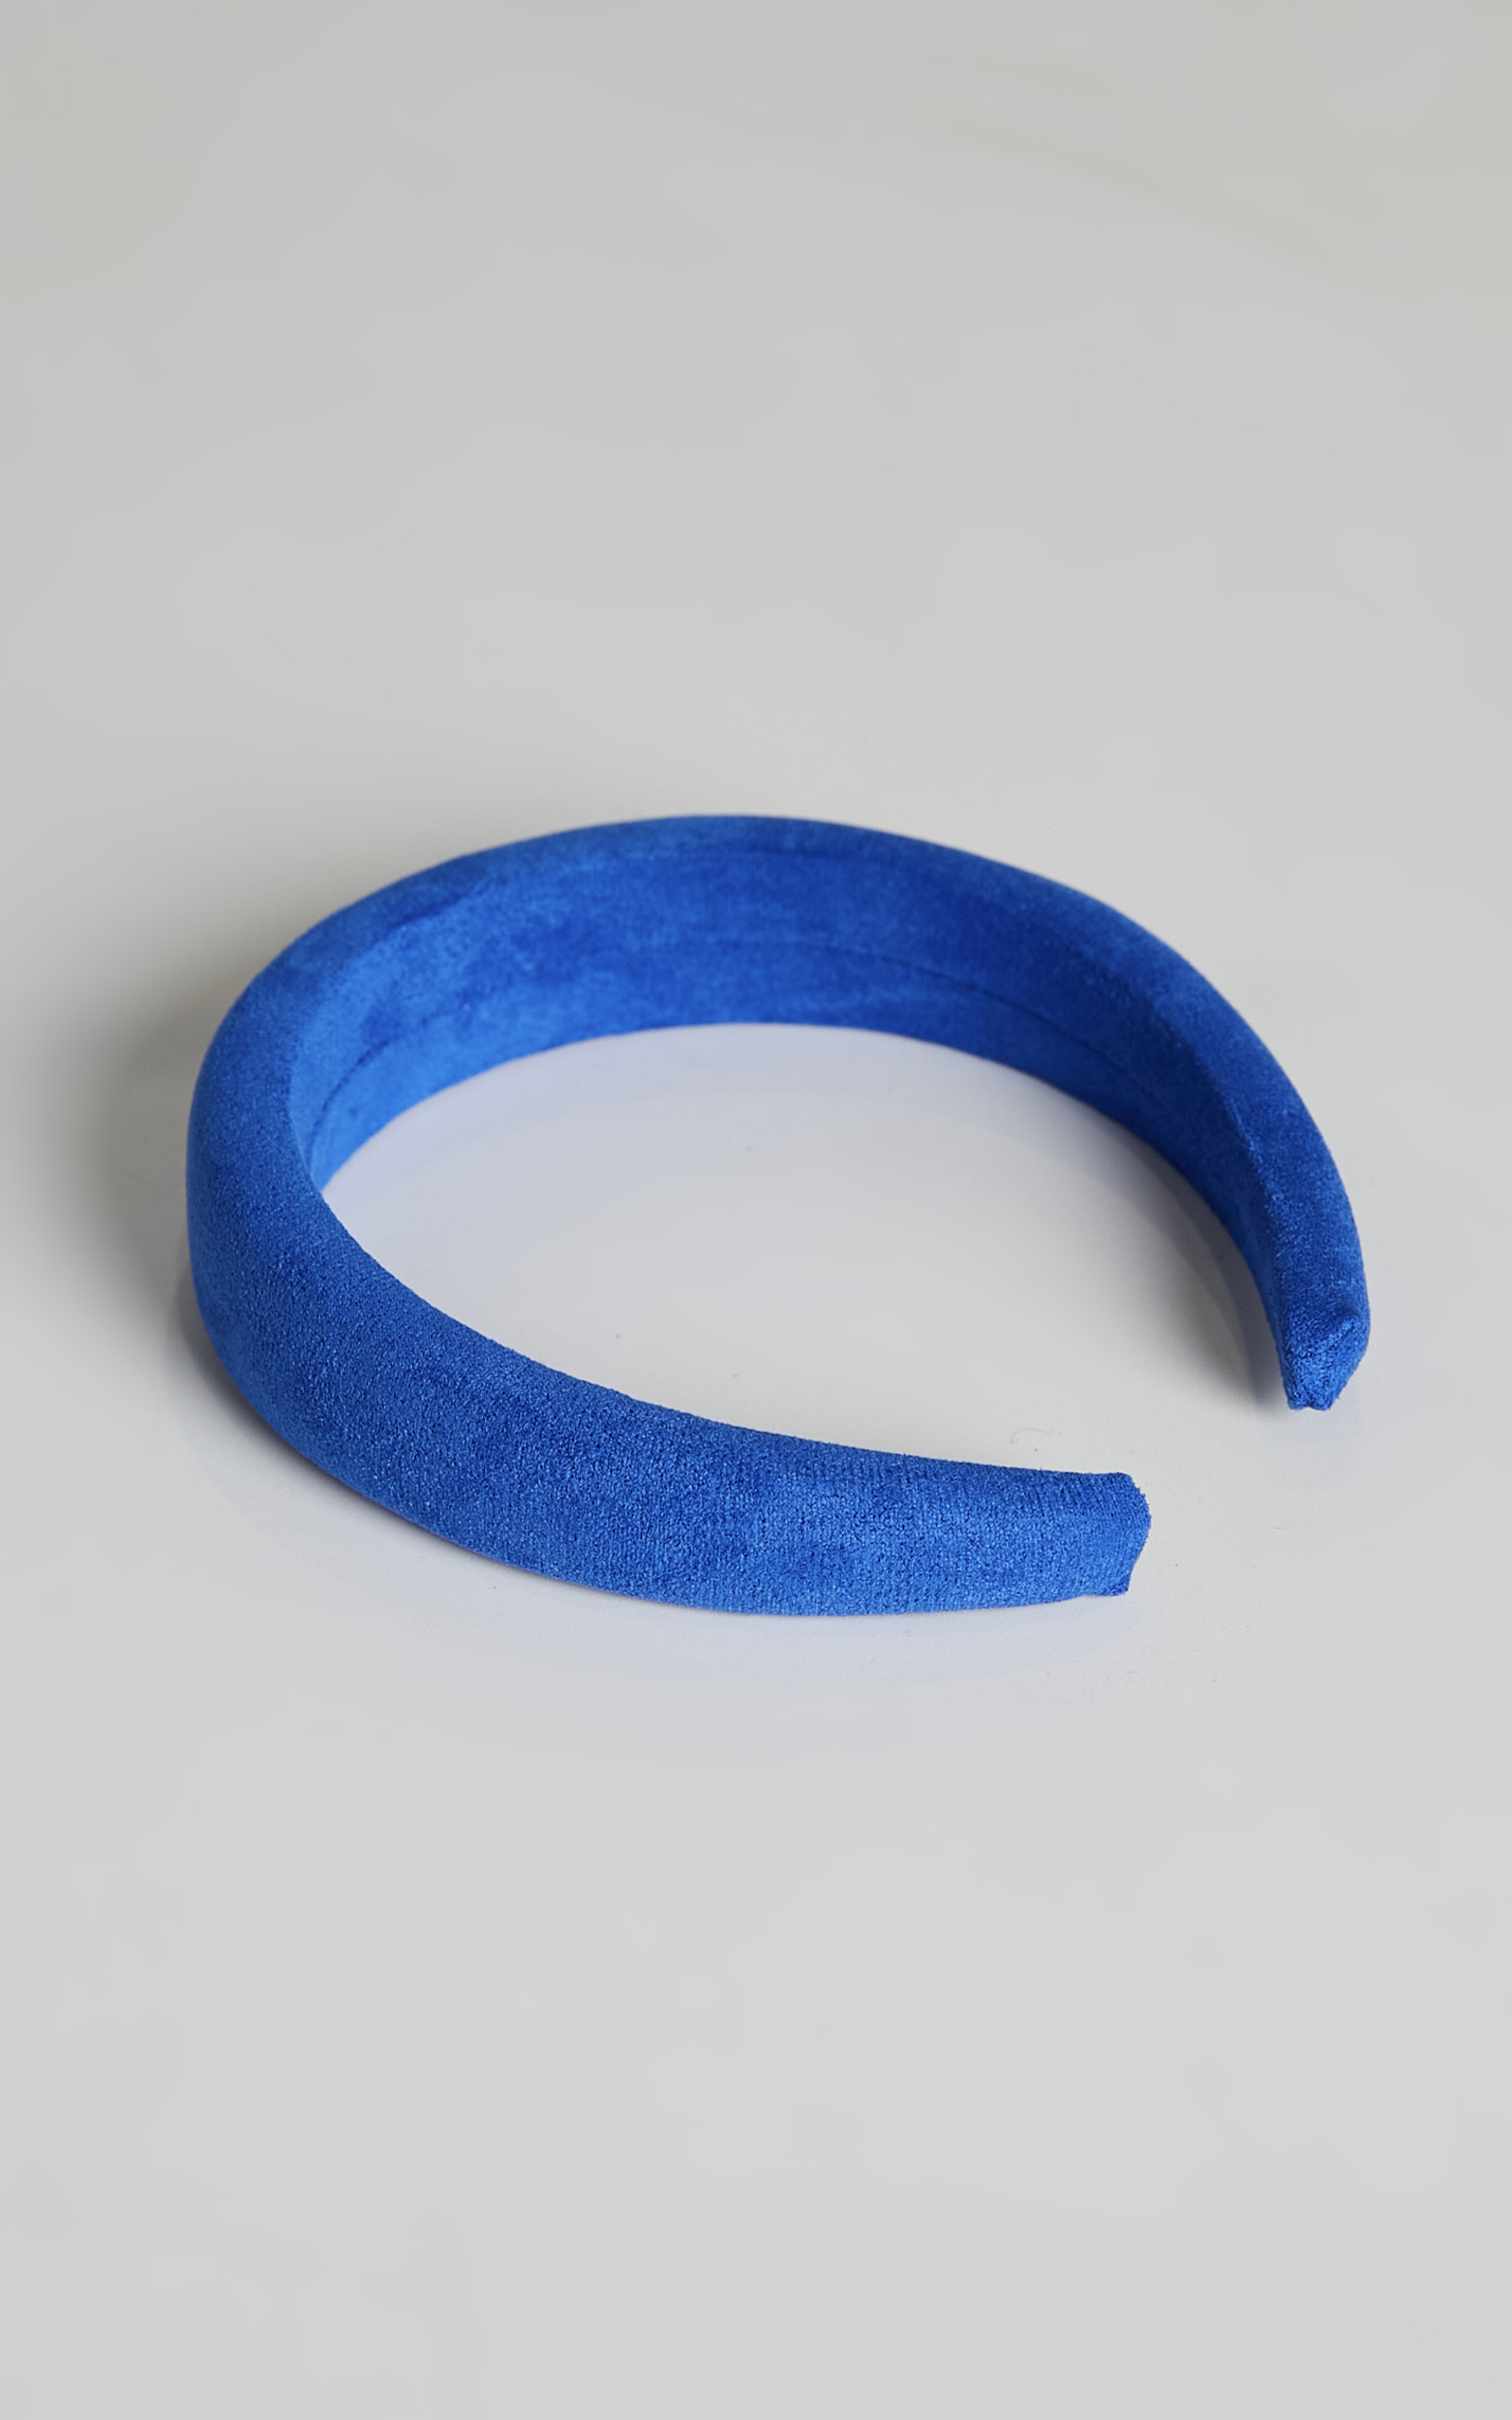 Filia Padded Headband in Blue - NoSize, BLU1, hi-res image number null